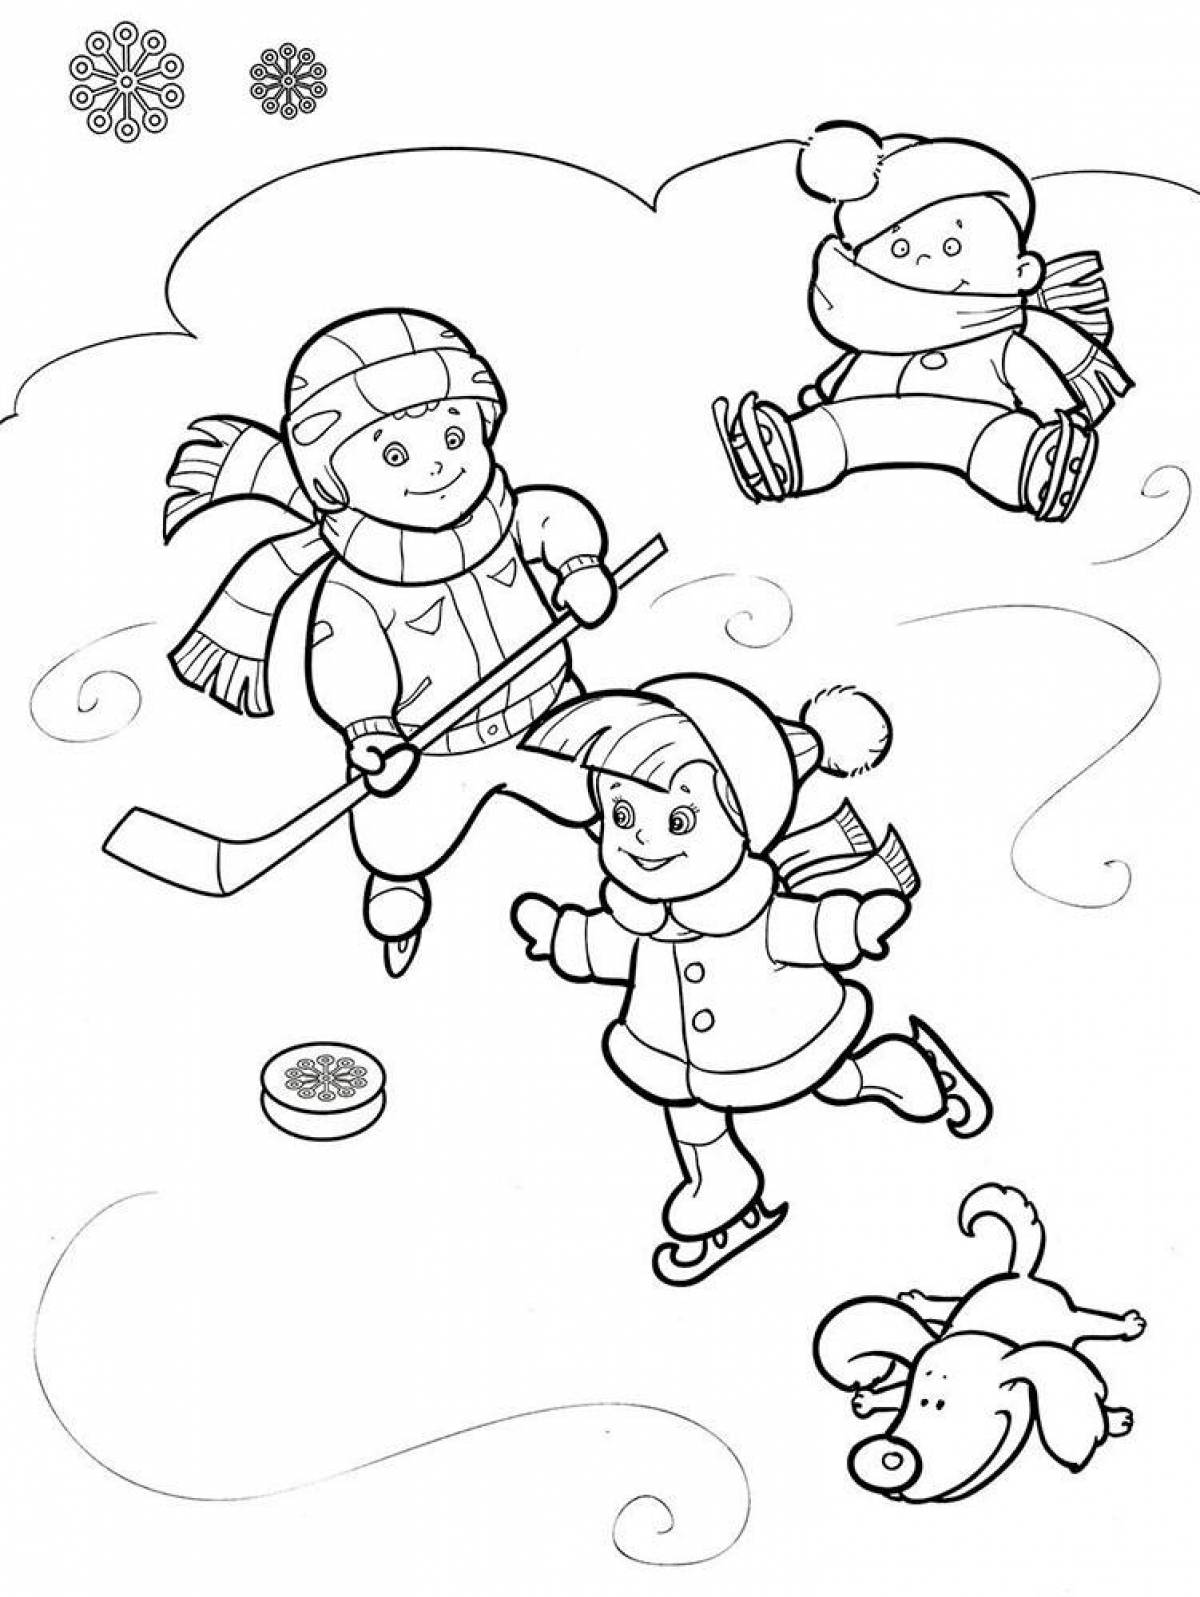 Great winter sports coloring book for kids